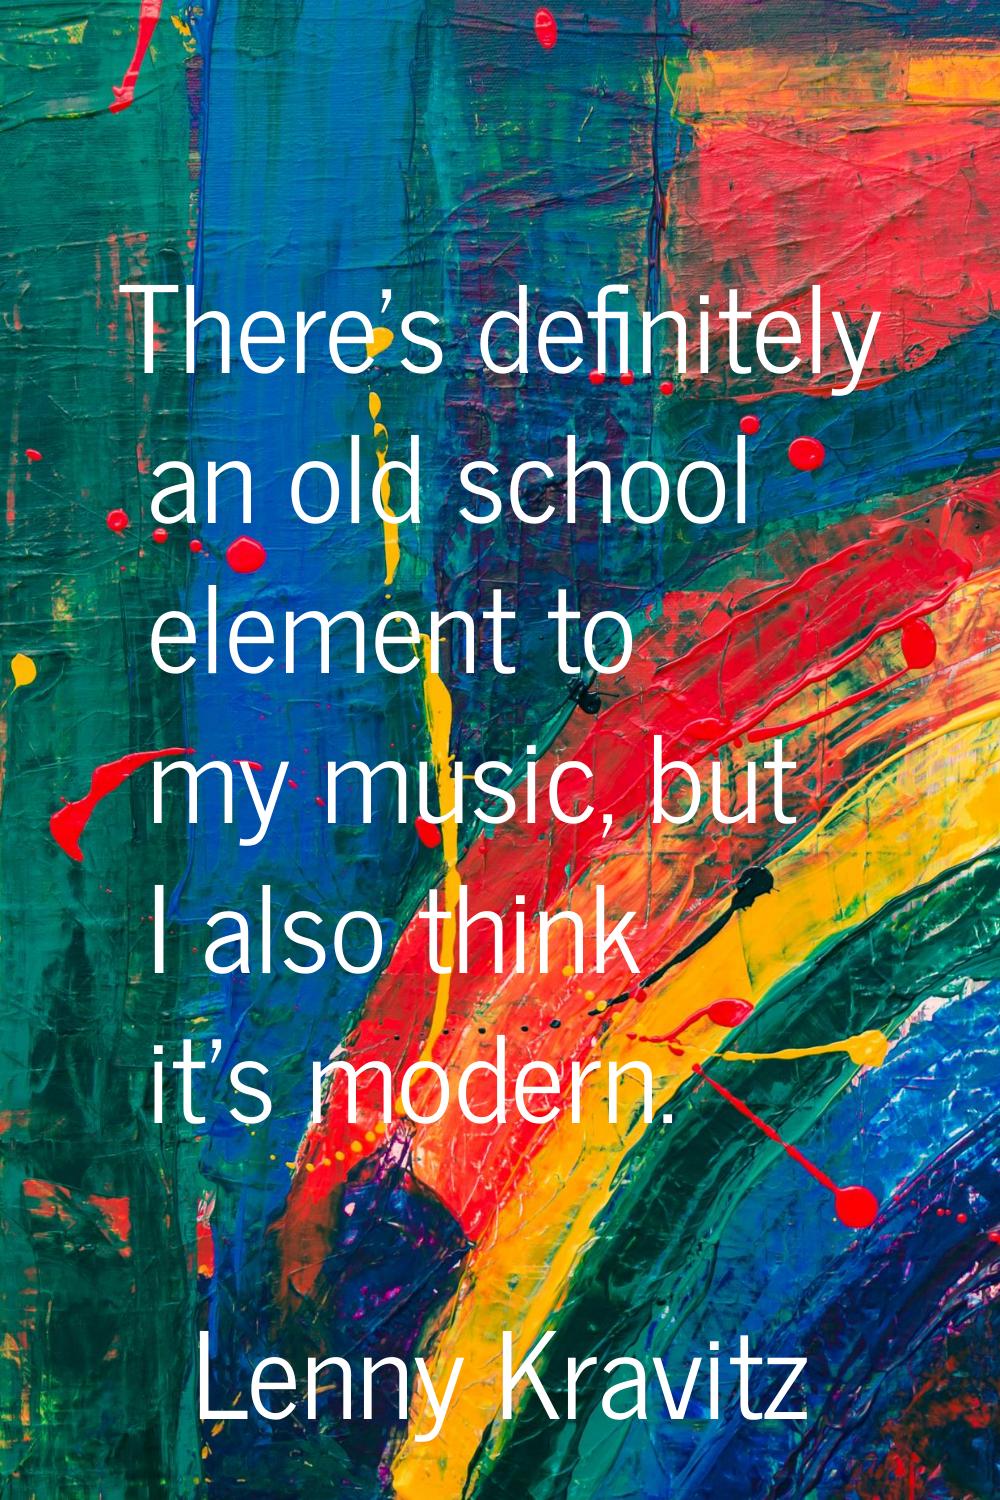 There's definitely an old school element to my music, but I also think it's modern.